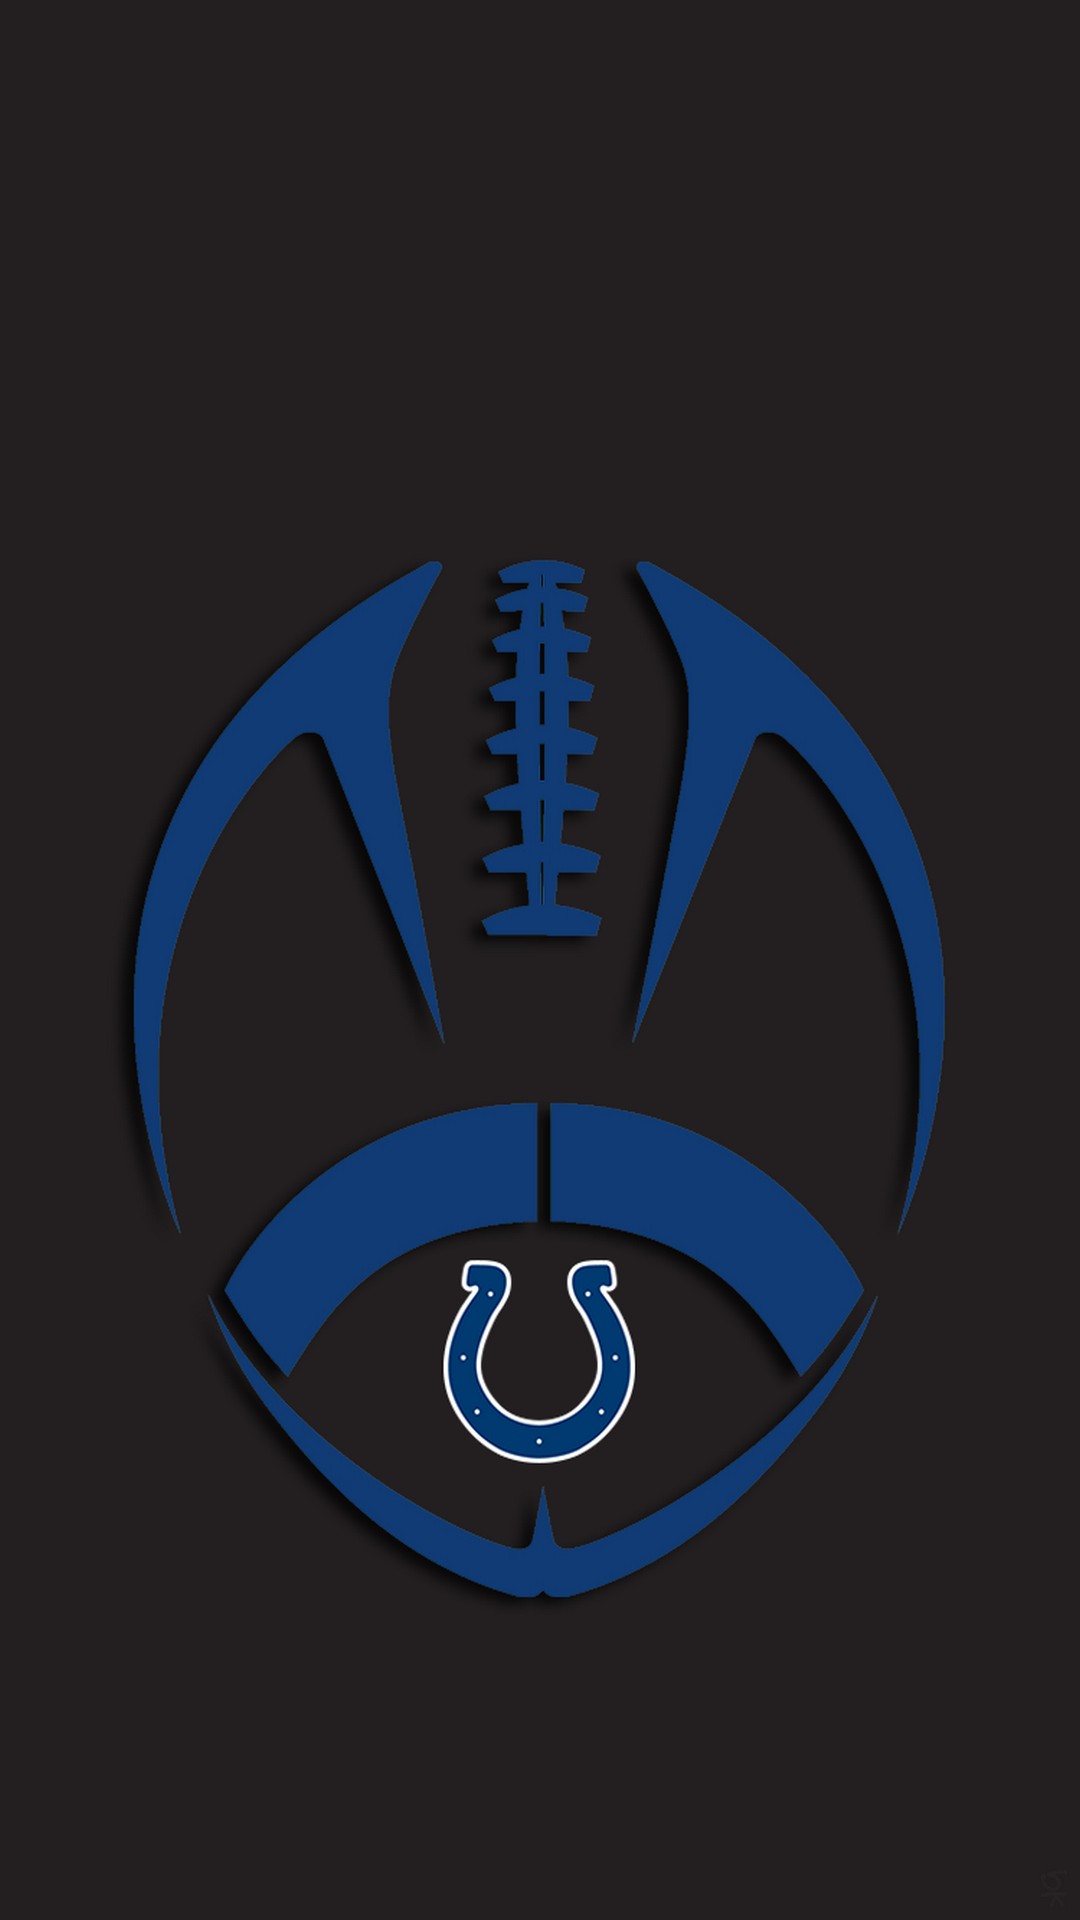 Indianapolis Colts iPhone Wallpaper Size with high-resolution 1080x1920 pixel. Donwload and set as wallpaper for your iPhone X, iPhone XS home screen backgrounds, XS Max, XR, iPhone8 lock screen wallpaper, iPhone 7, 6, SE and other mobile devices